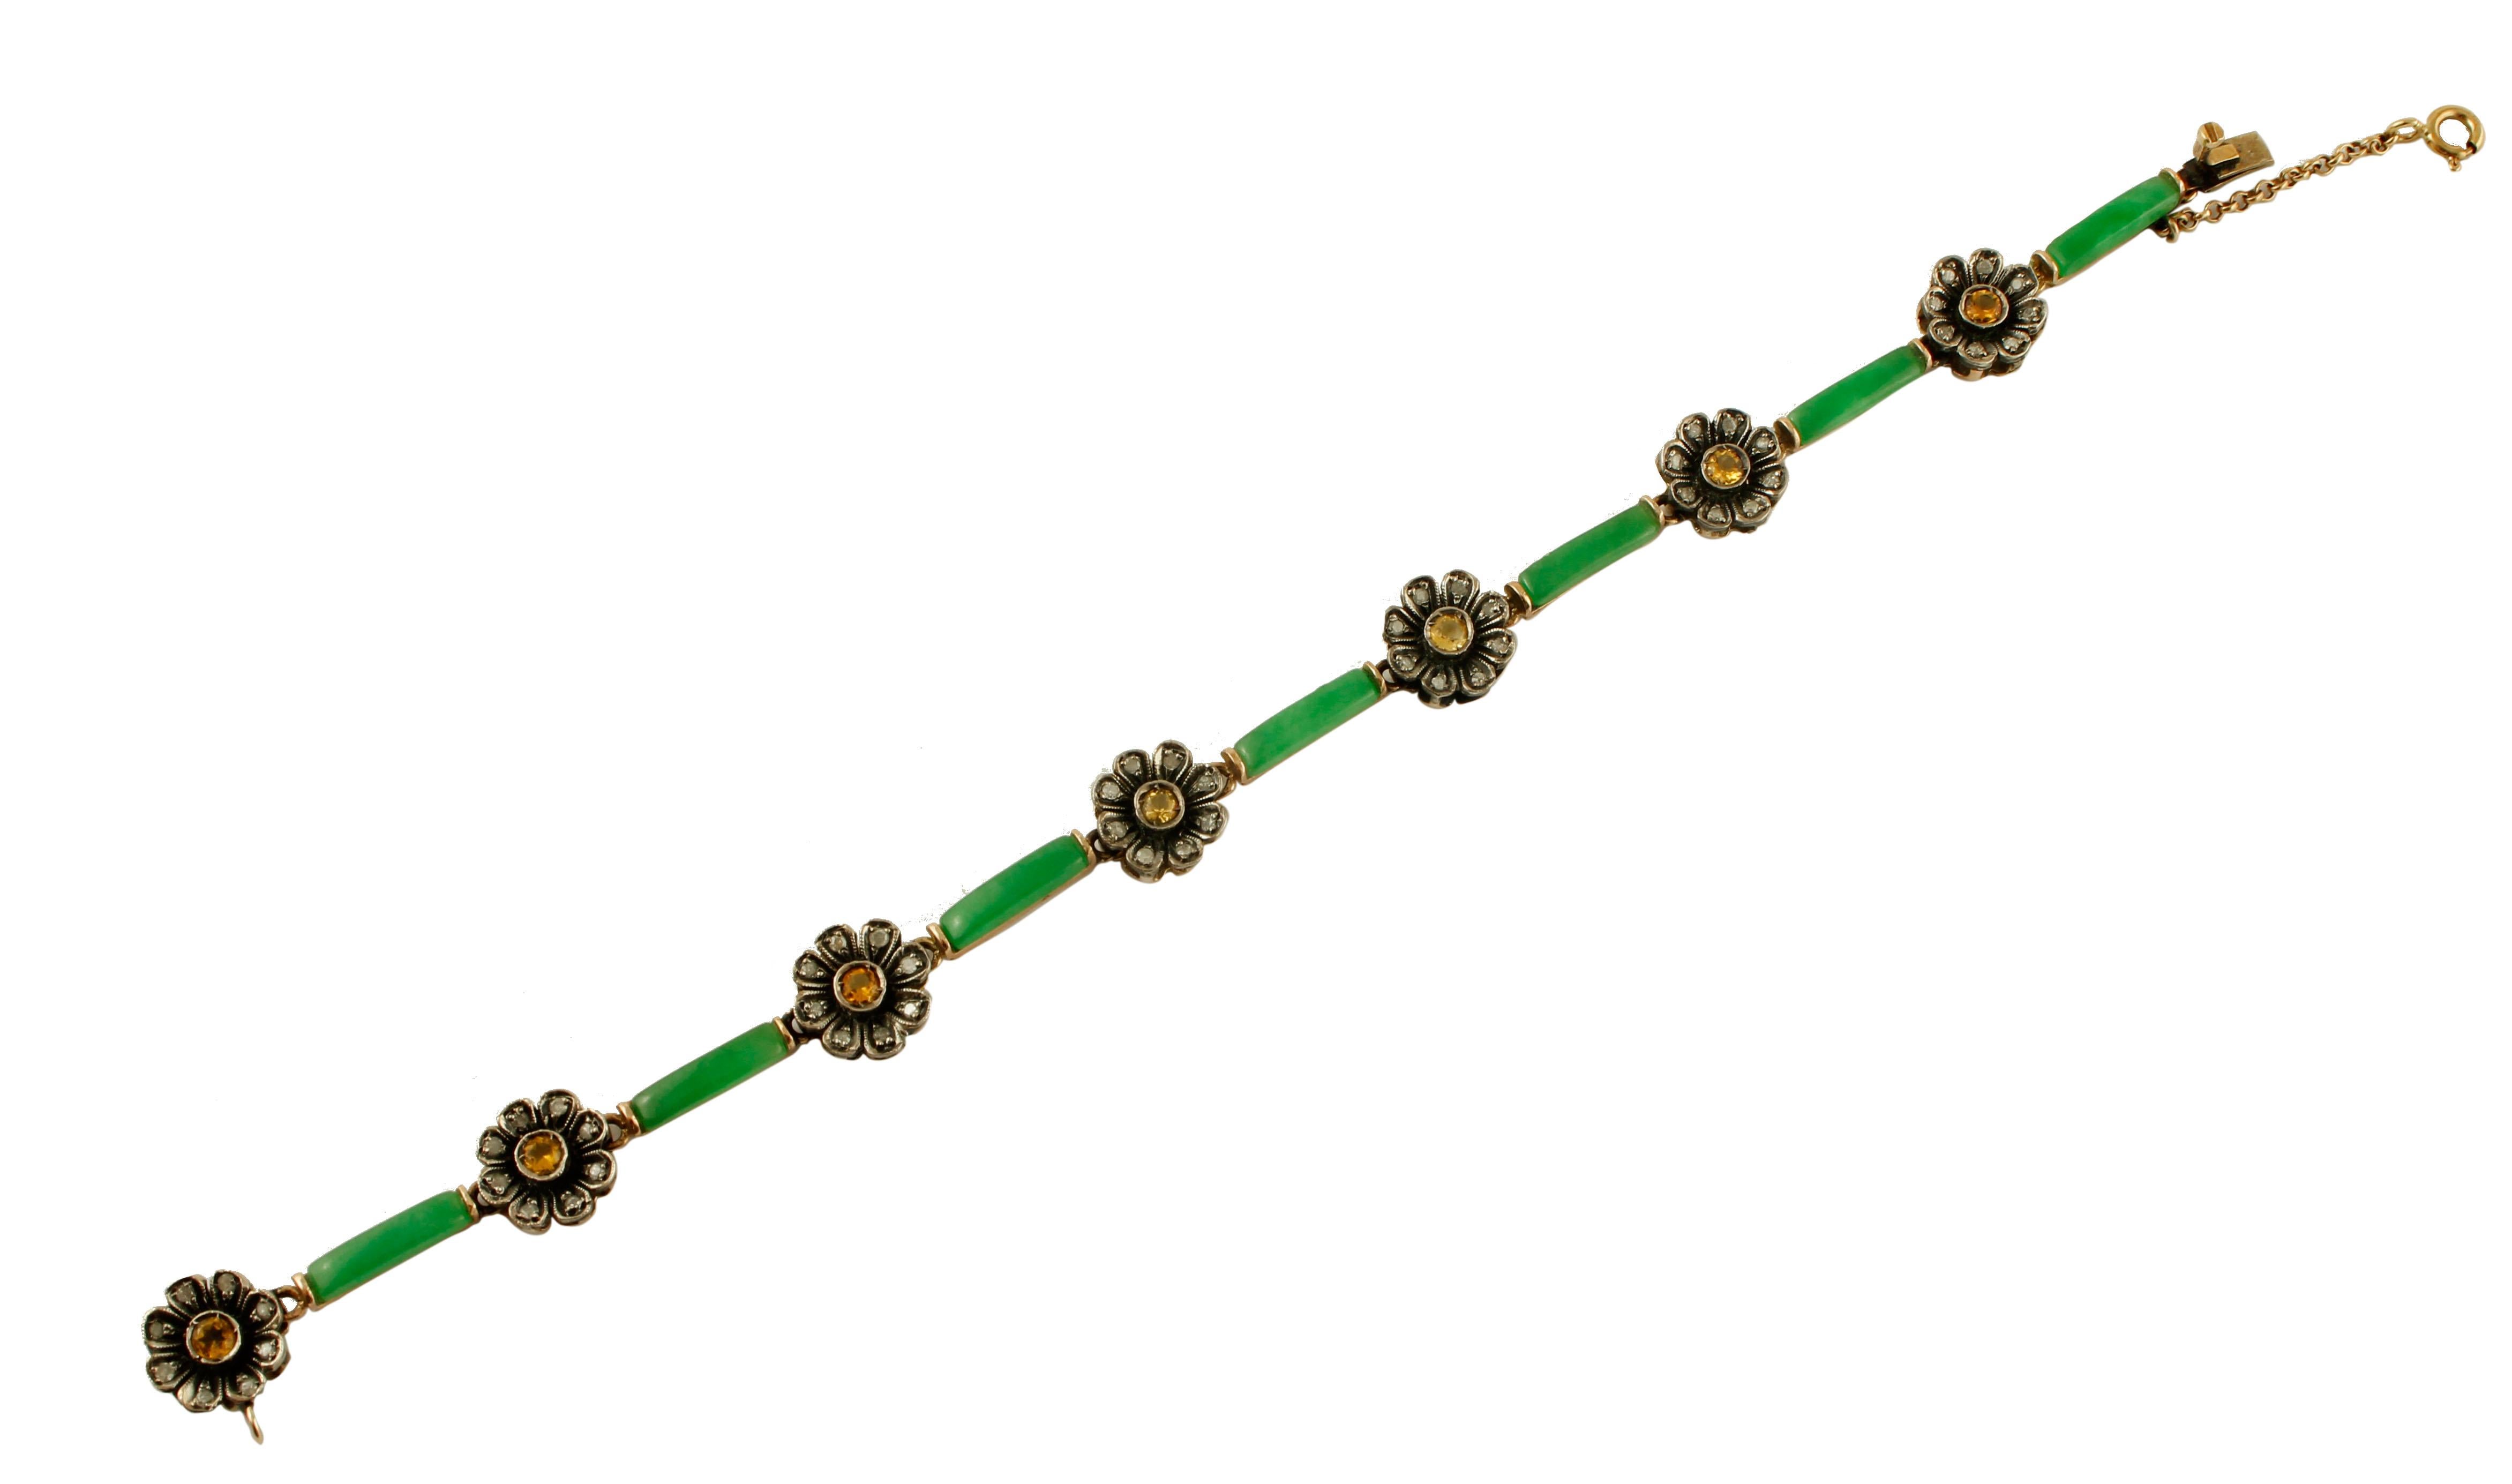 Yellow Topaz, Malaysian Jade, Diamonds, 9 Karat Gold and Silver Retro Bracelet In Excellent Condition For Sale In Marcianise, Marcianise (CE)